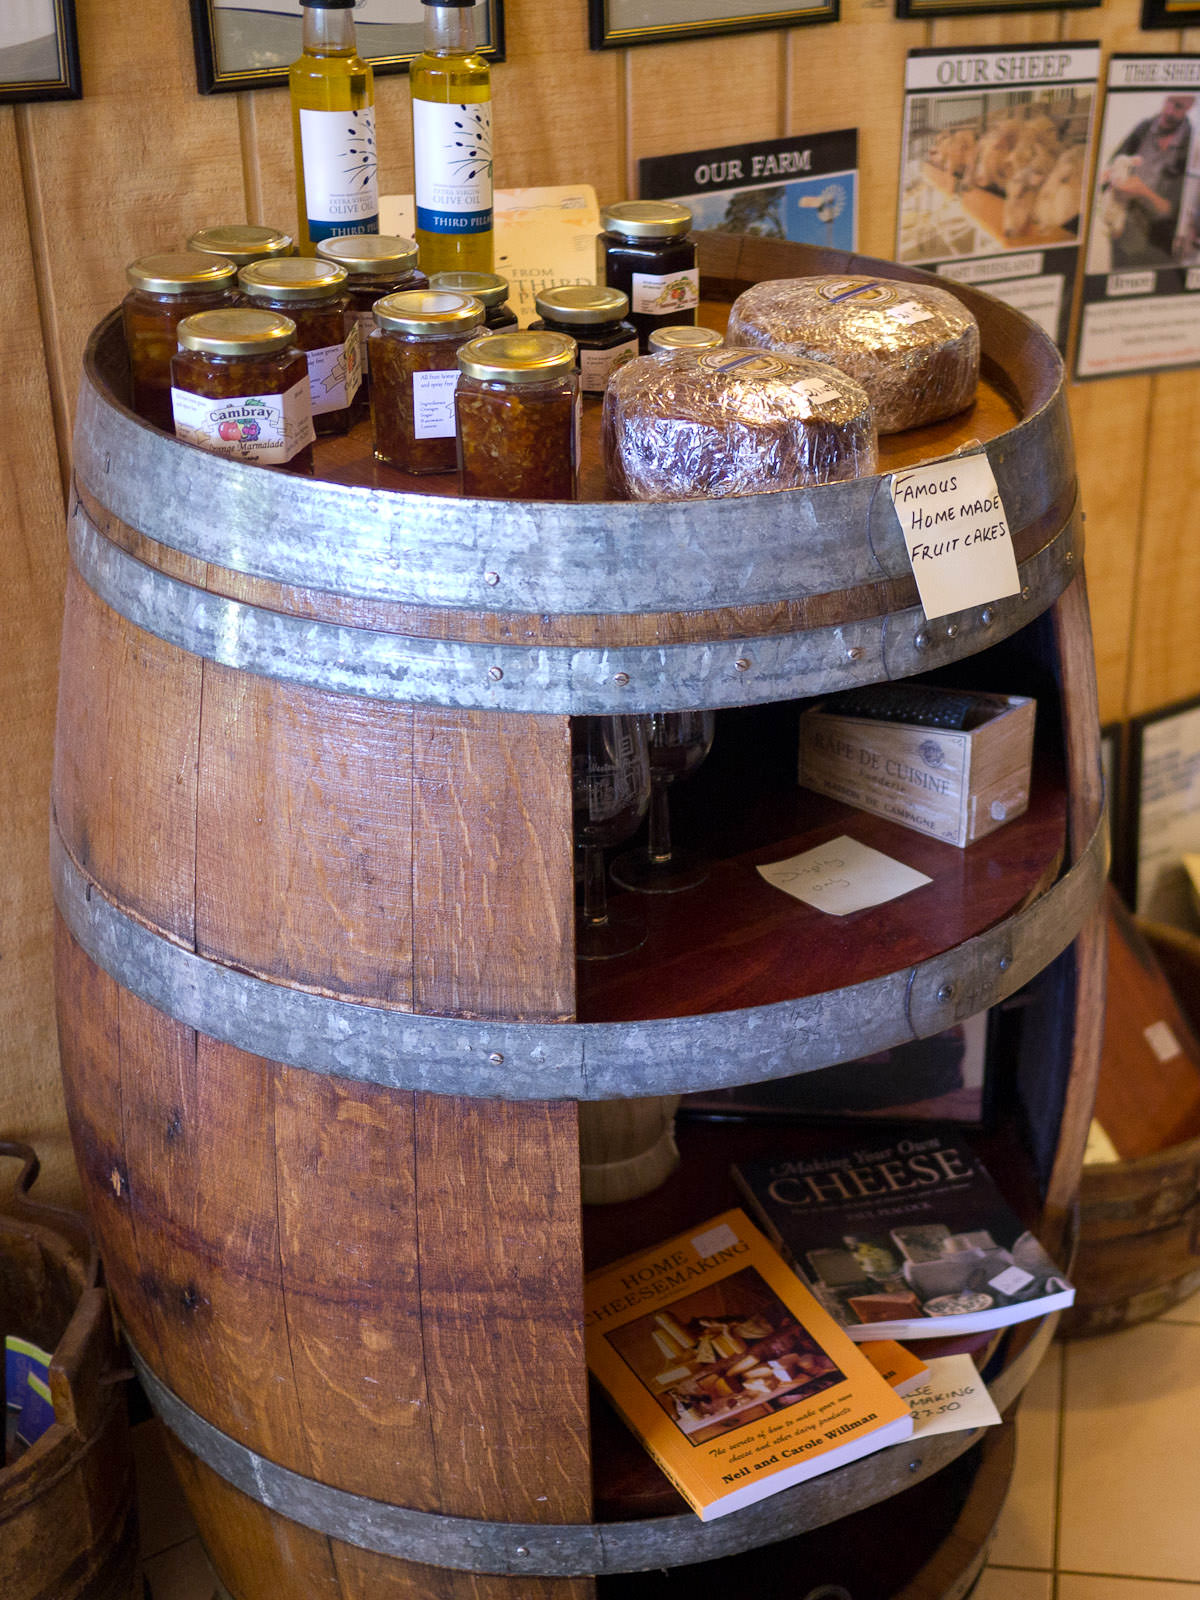 Barrel of goodies - local olive oil, preserves, famous homemade fruit cakes and books about cheese